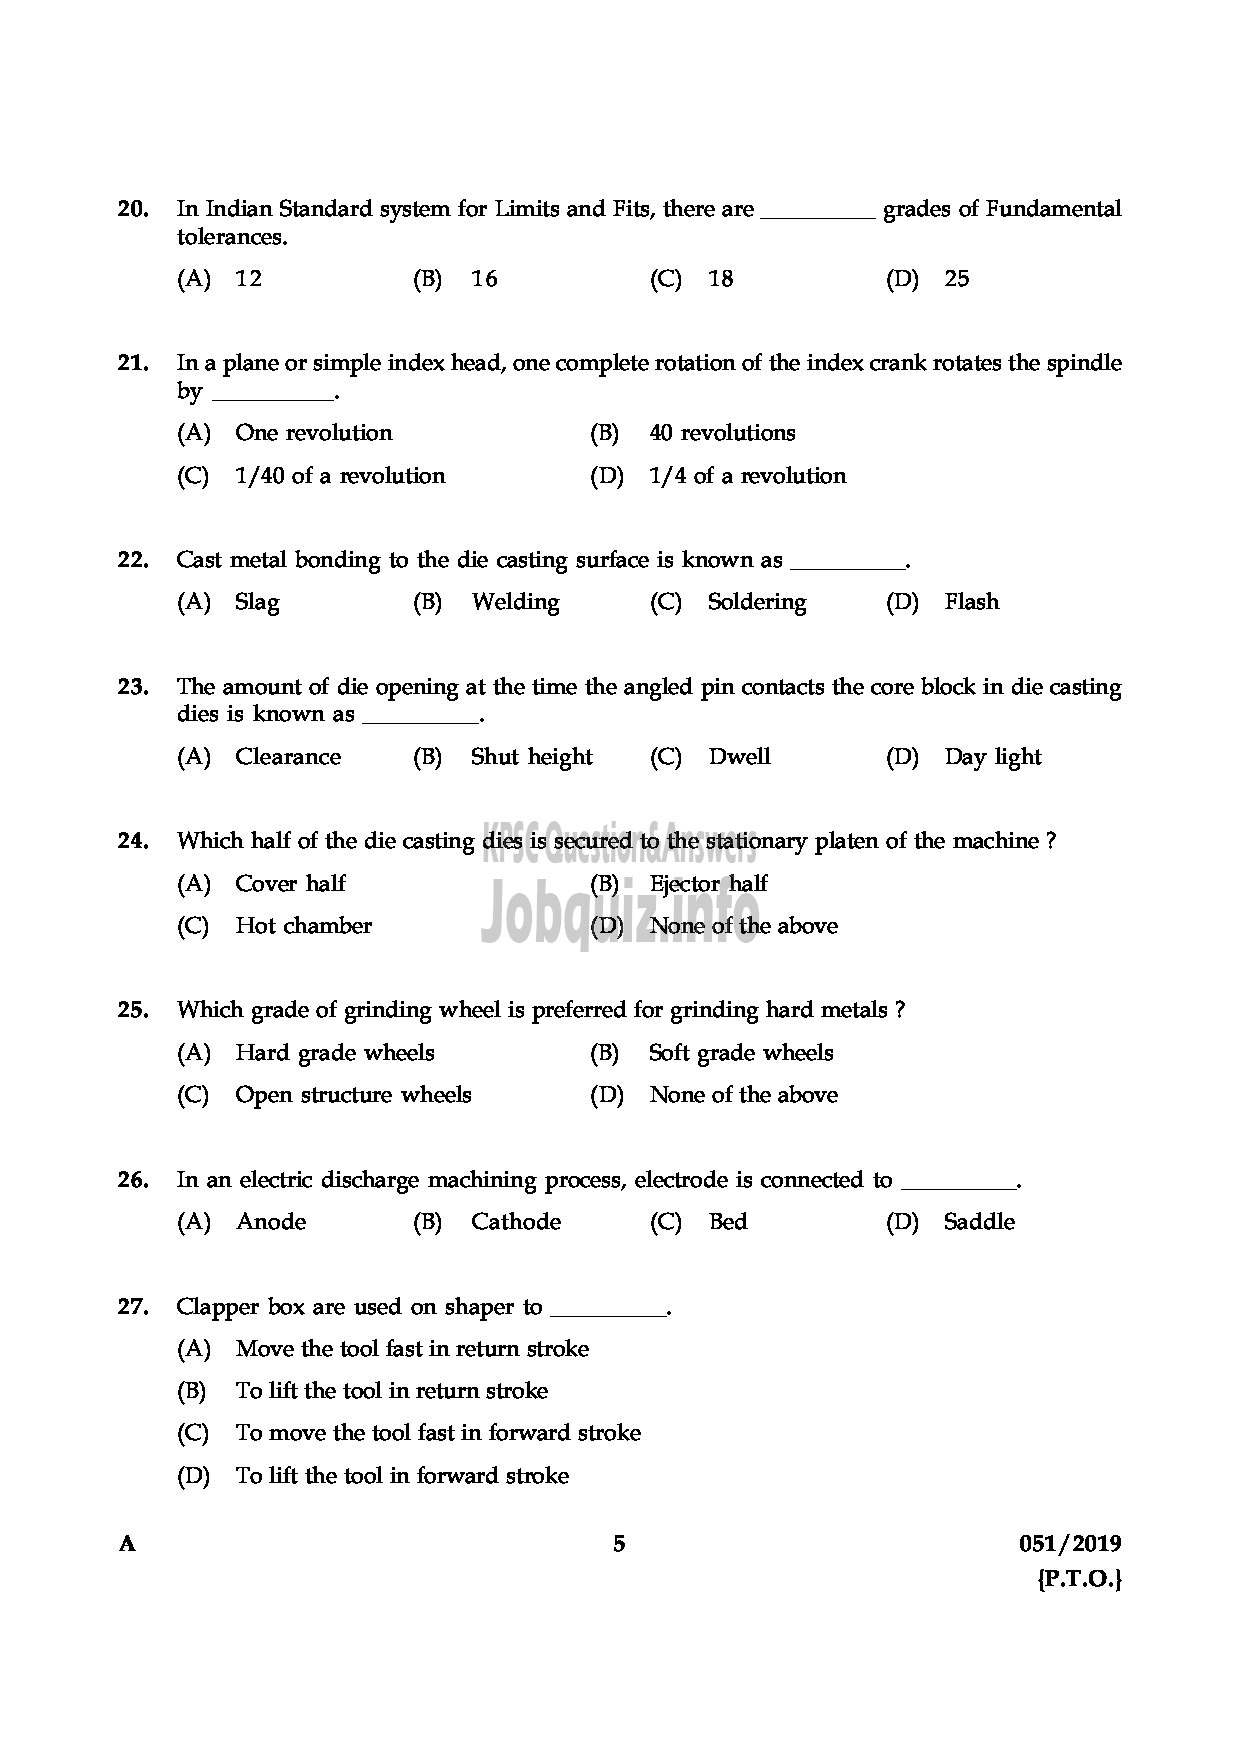 Kerala PSC Question Paper - JUNIOR INSTRUCTOR TOOL & DIE MAKER INDUSTRIAL TRAINING English -5